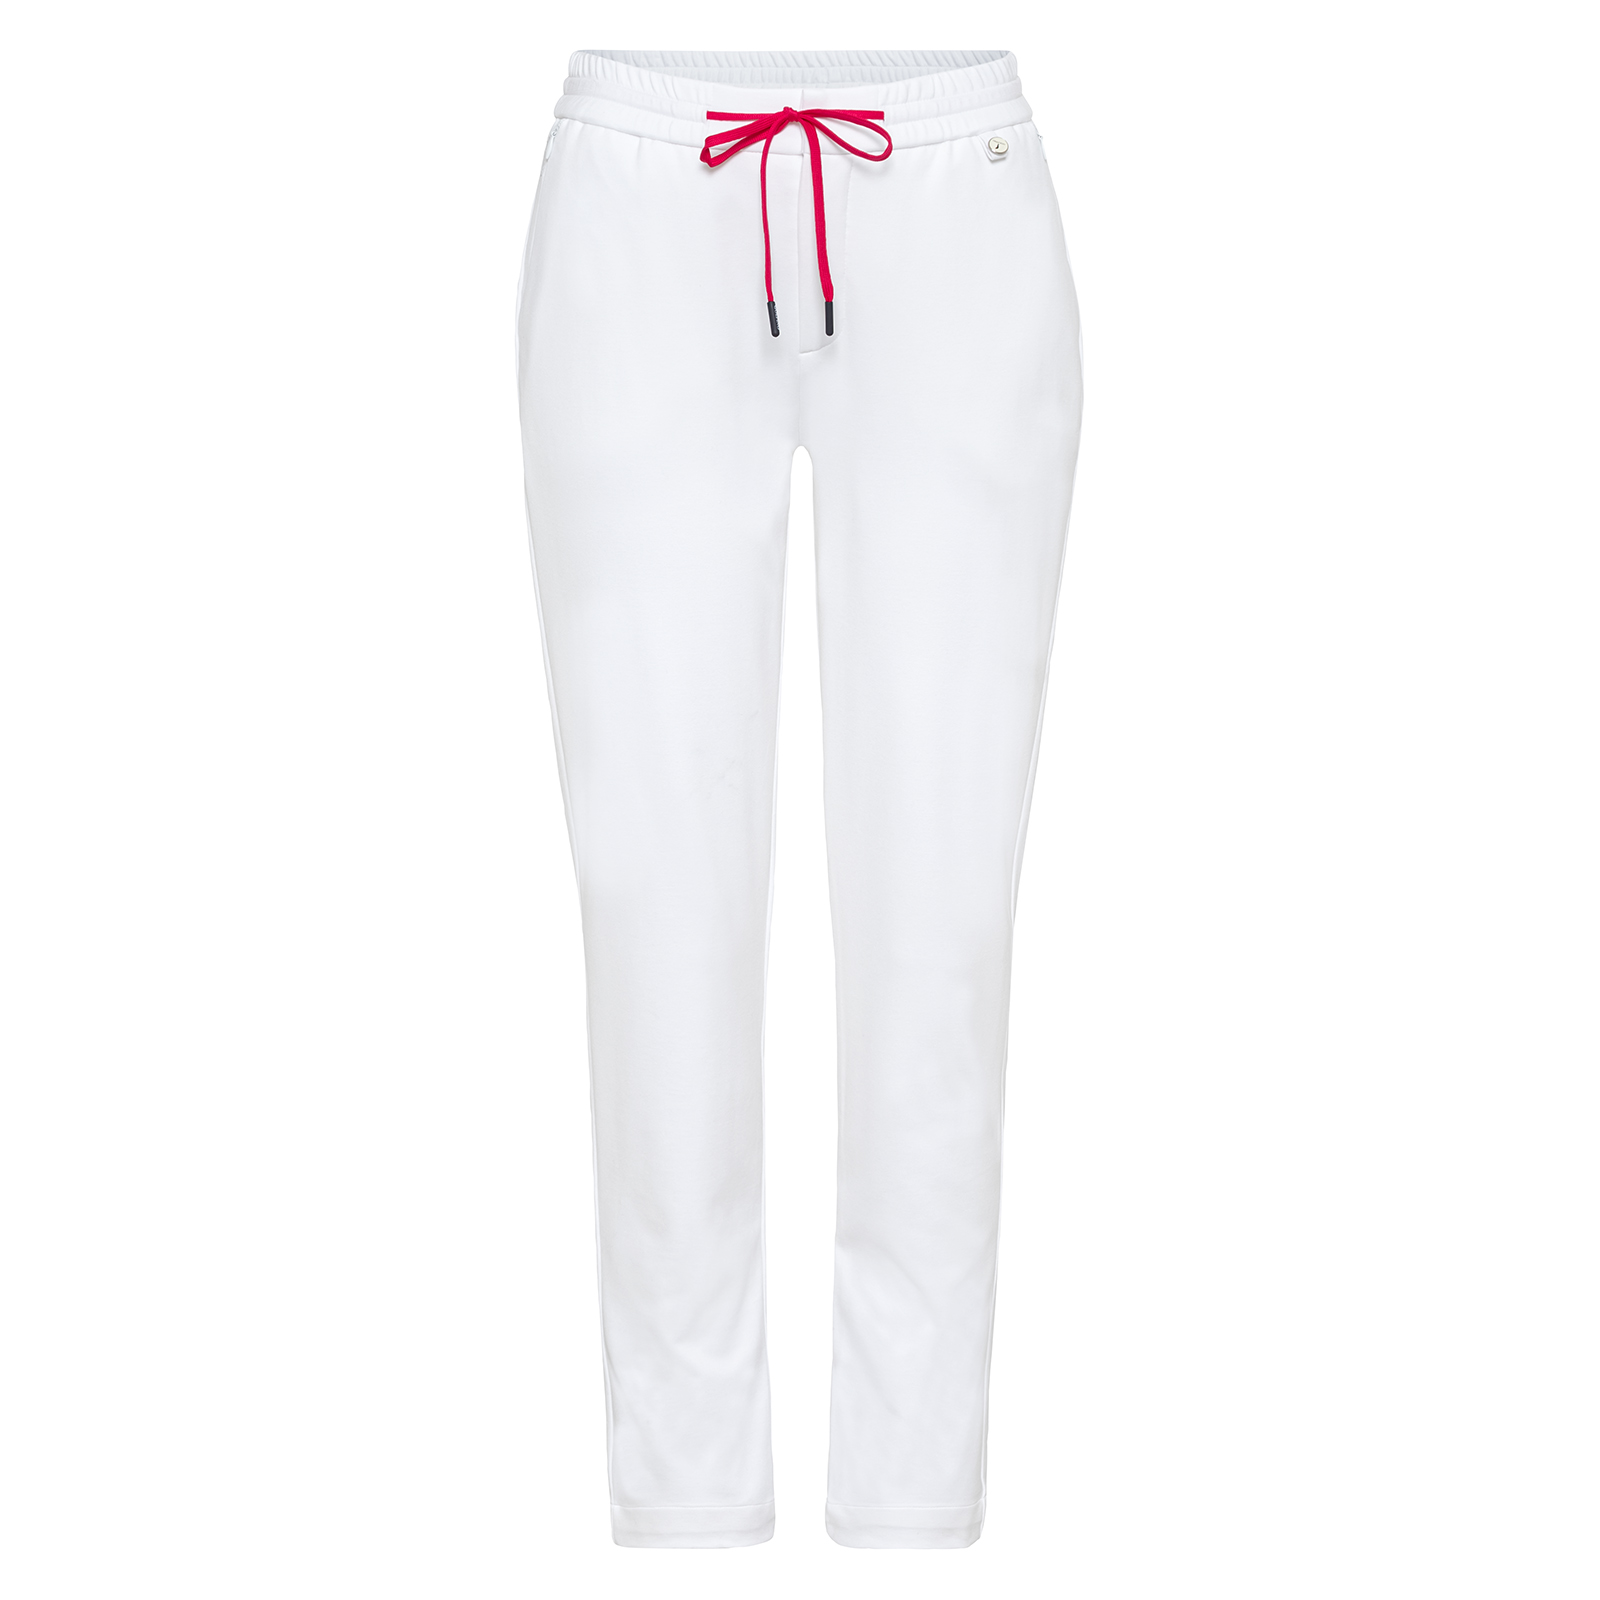 Particularly flexible ladies' 7/8-length trousers in an attractive design